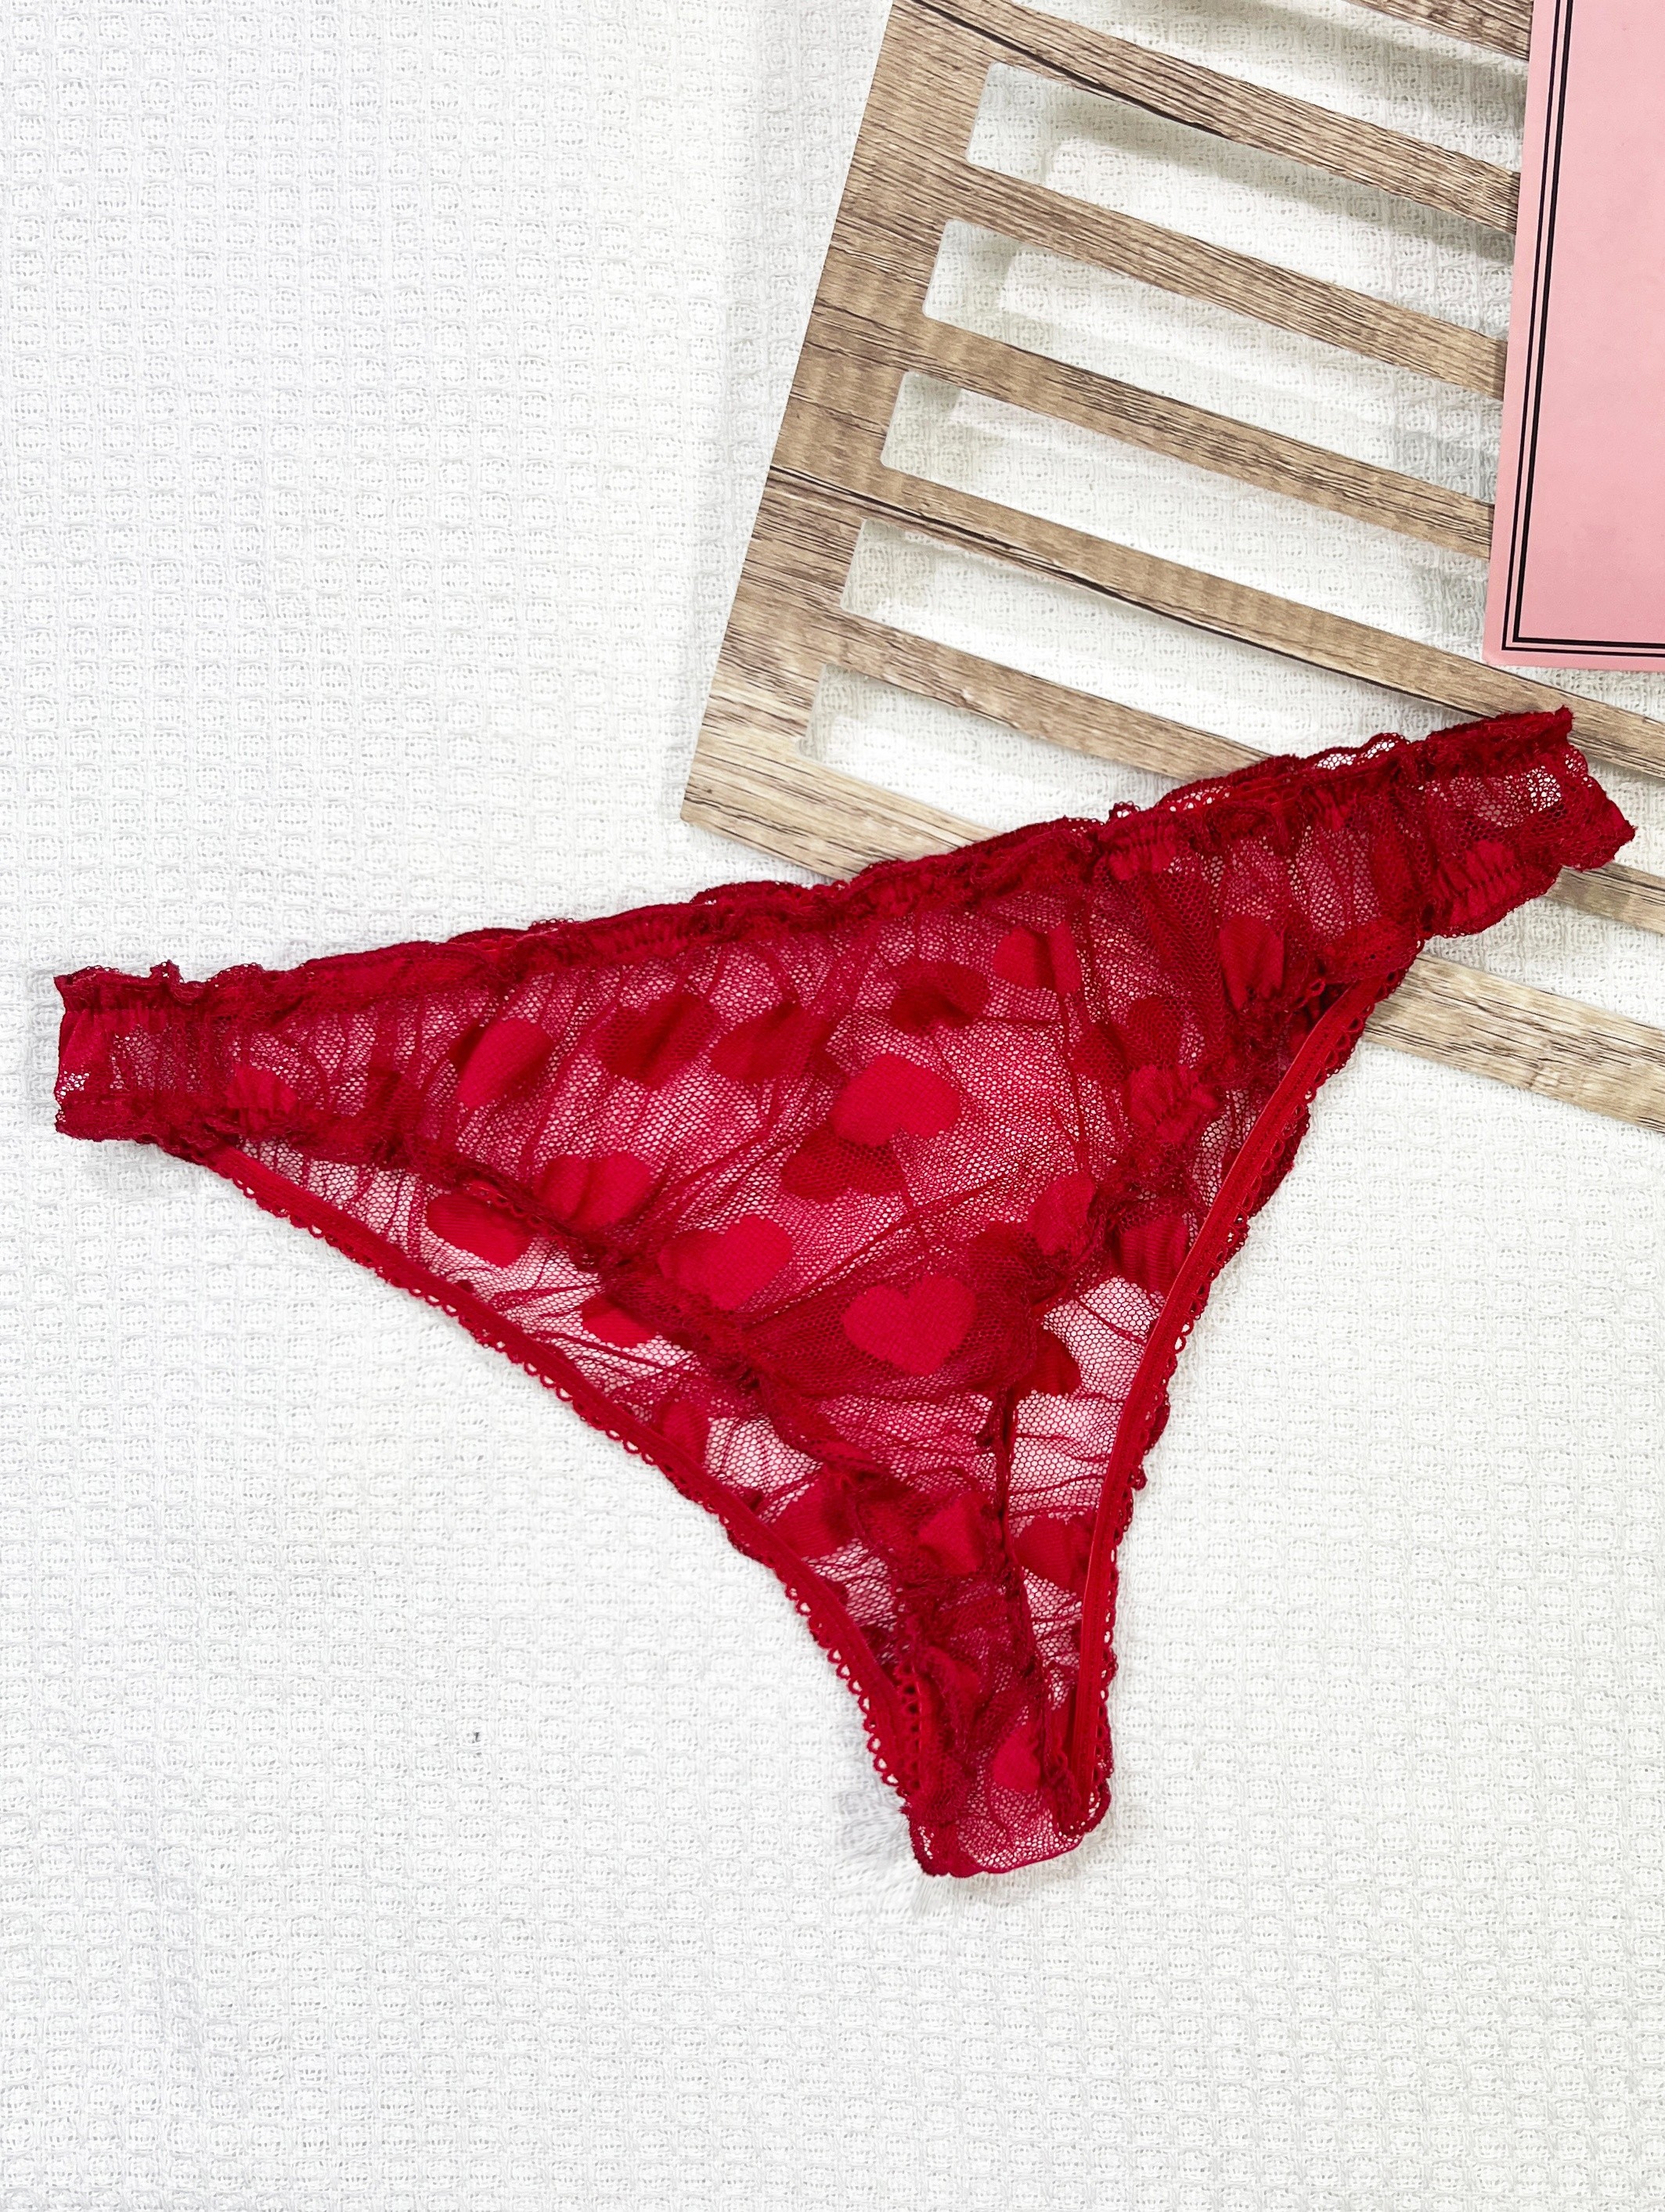 Sheer Panties in Red Lace, Lingerie See Through, Sexy Lingerie